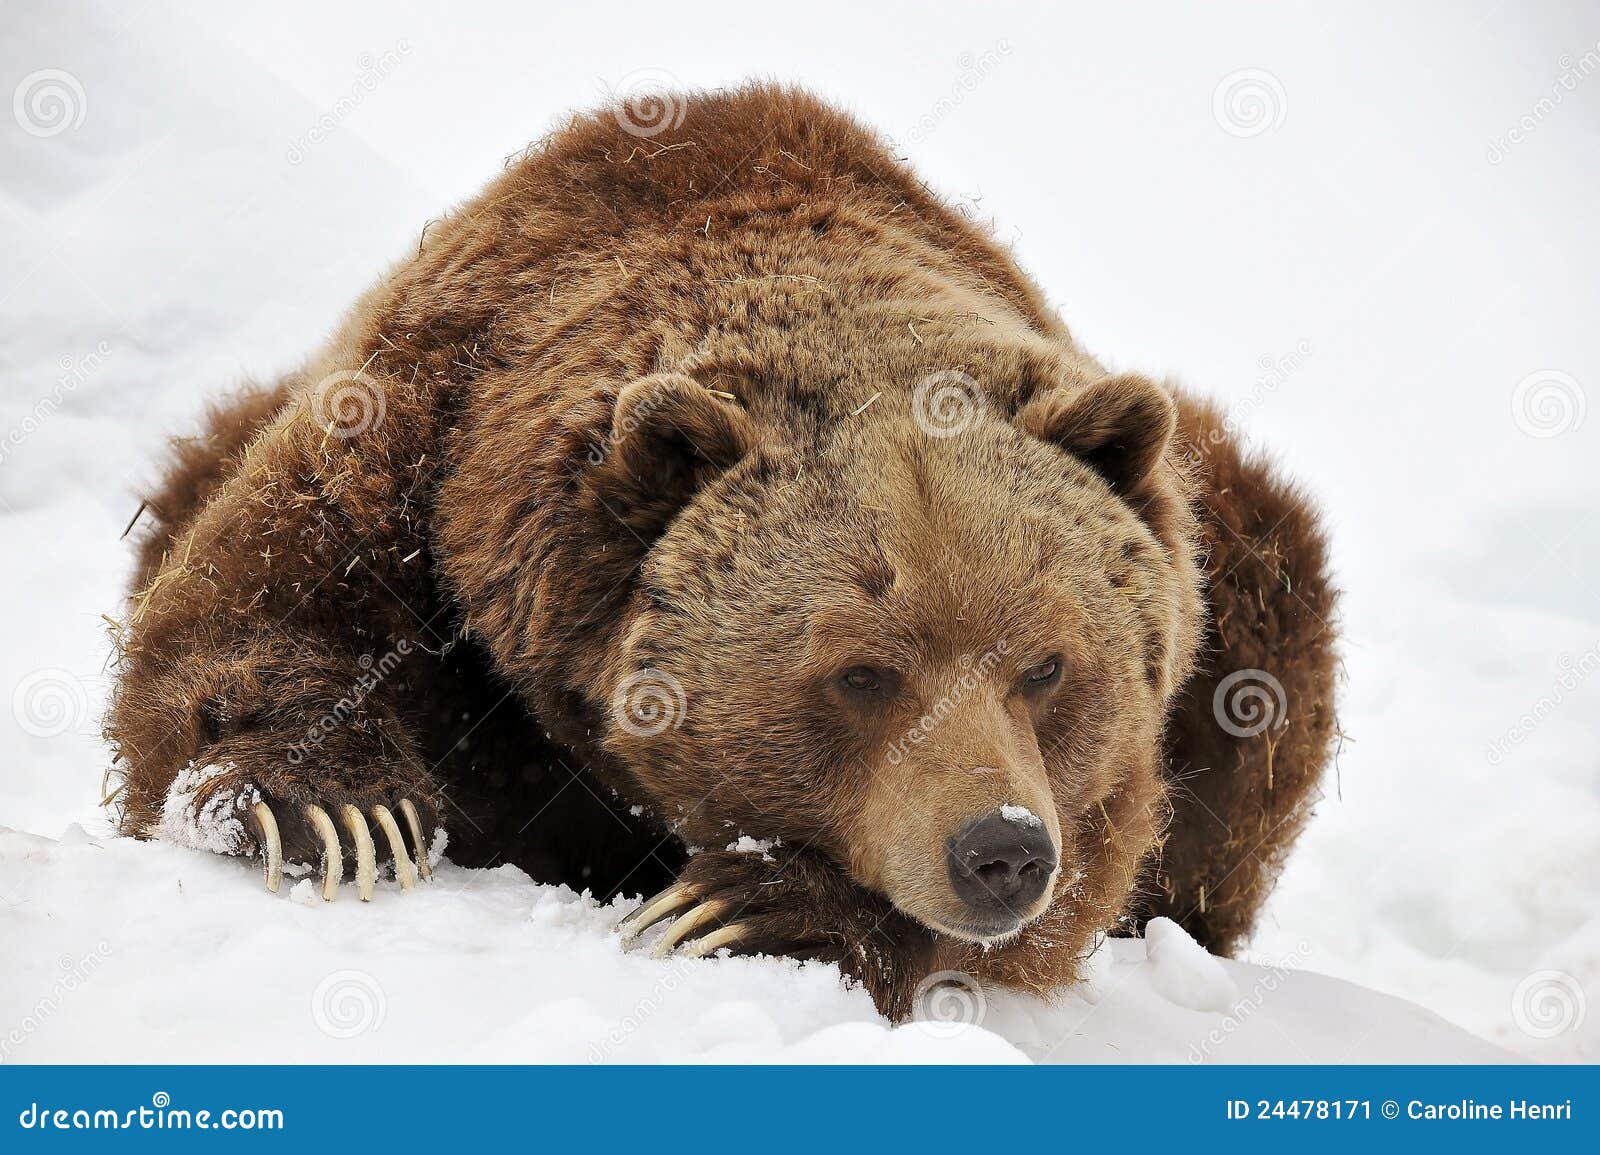 tired grizzly bear